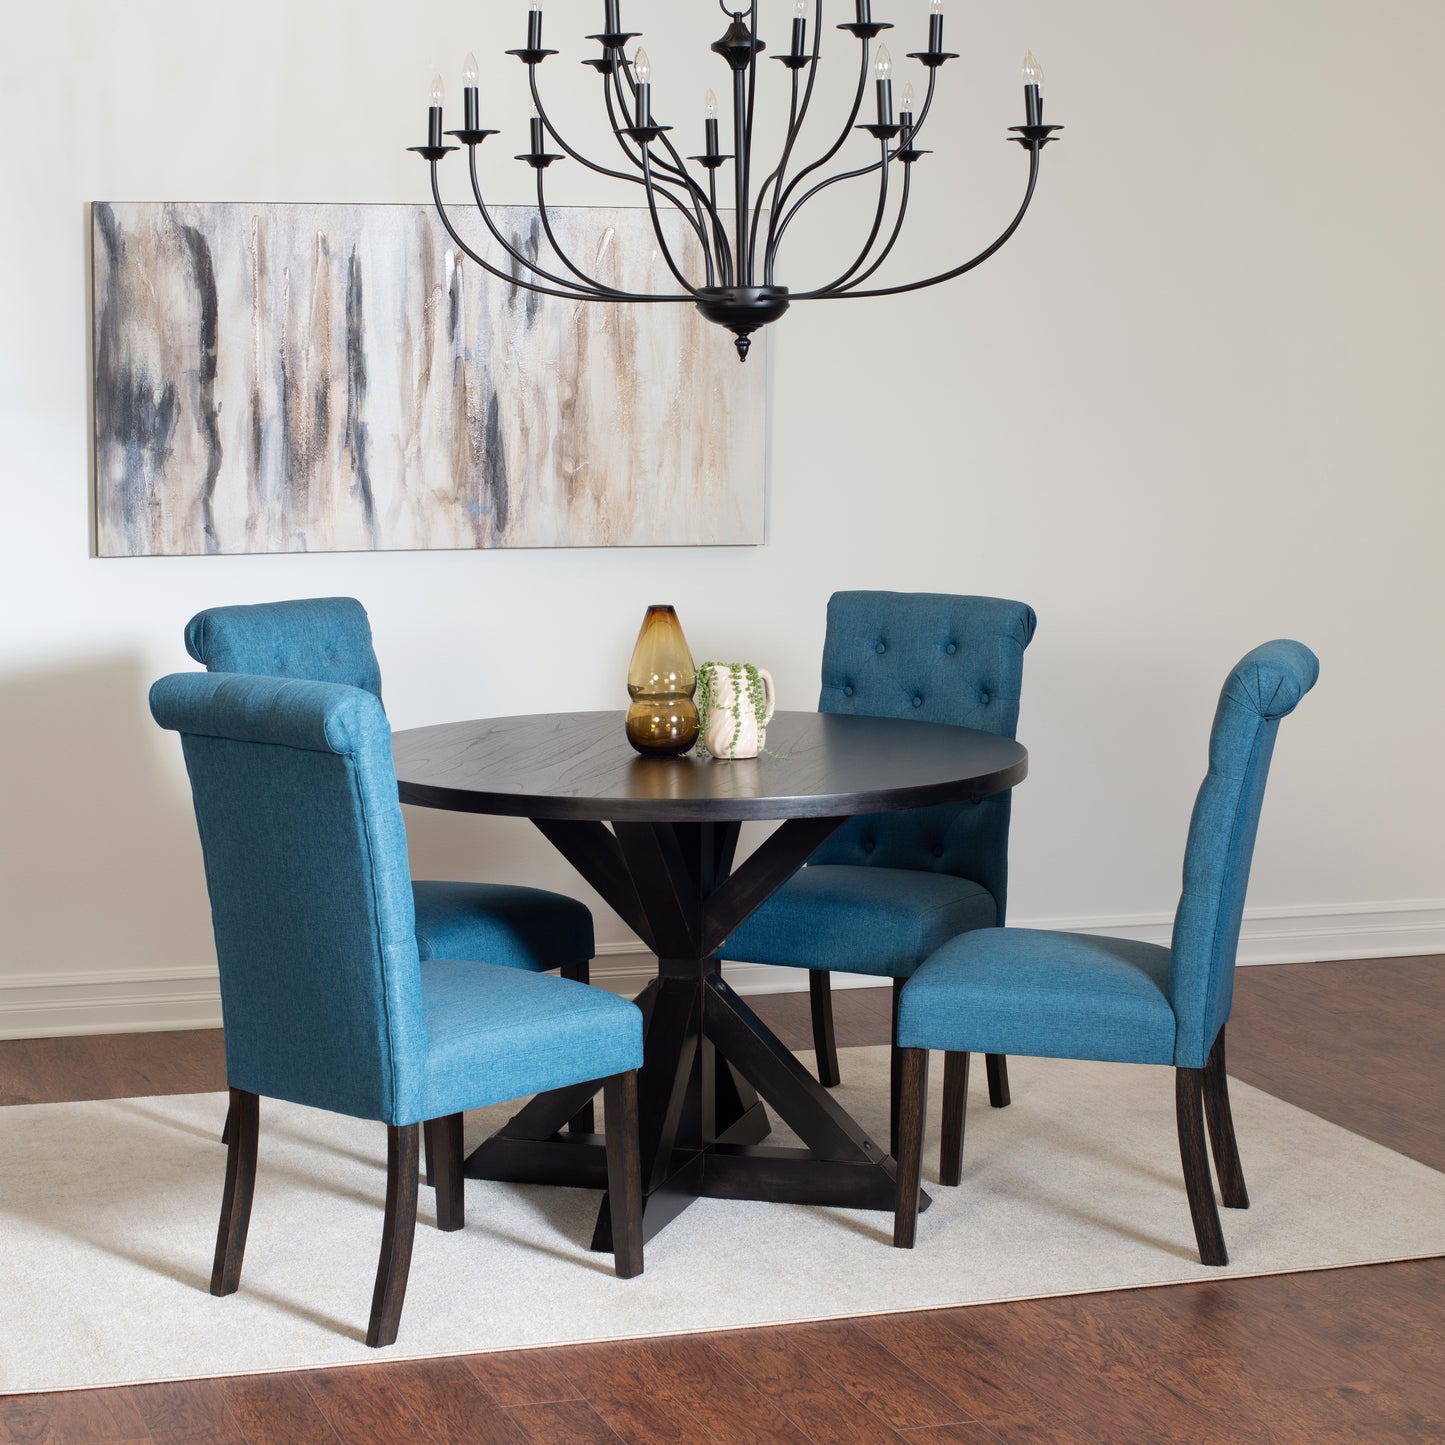 Nylander 5-piece Dining Set, Cross-Buck Dining Table with 4 Stylish Chairs